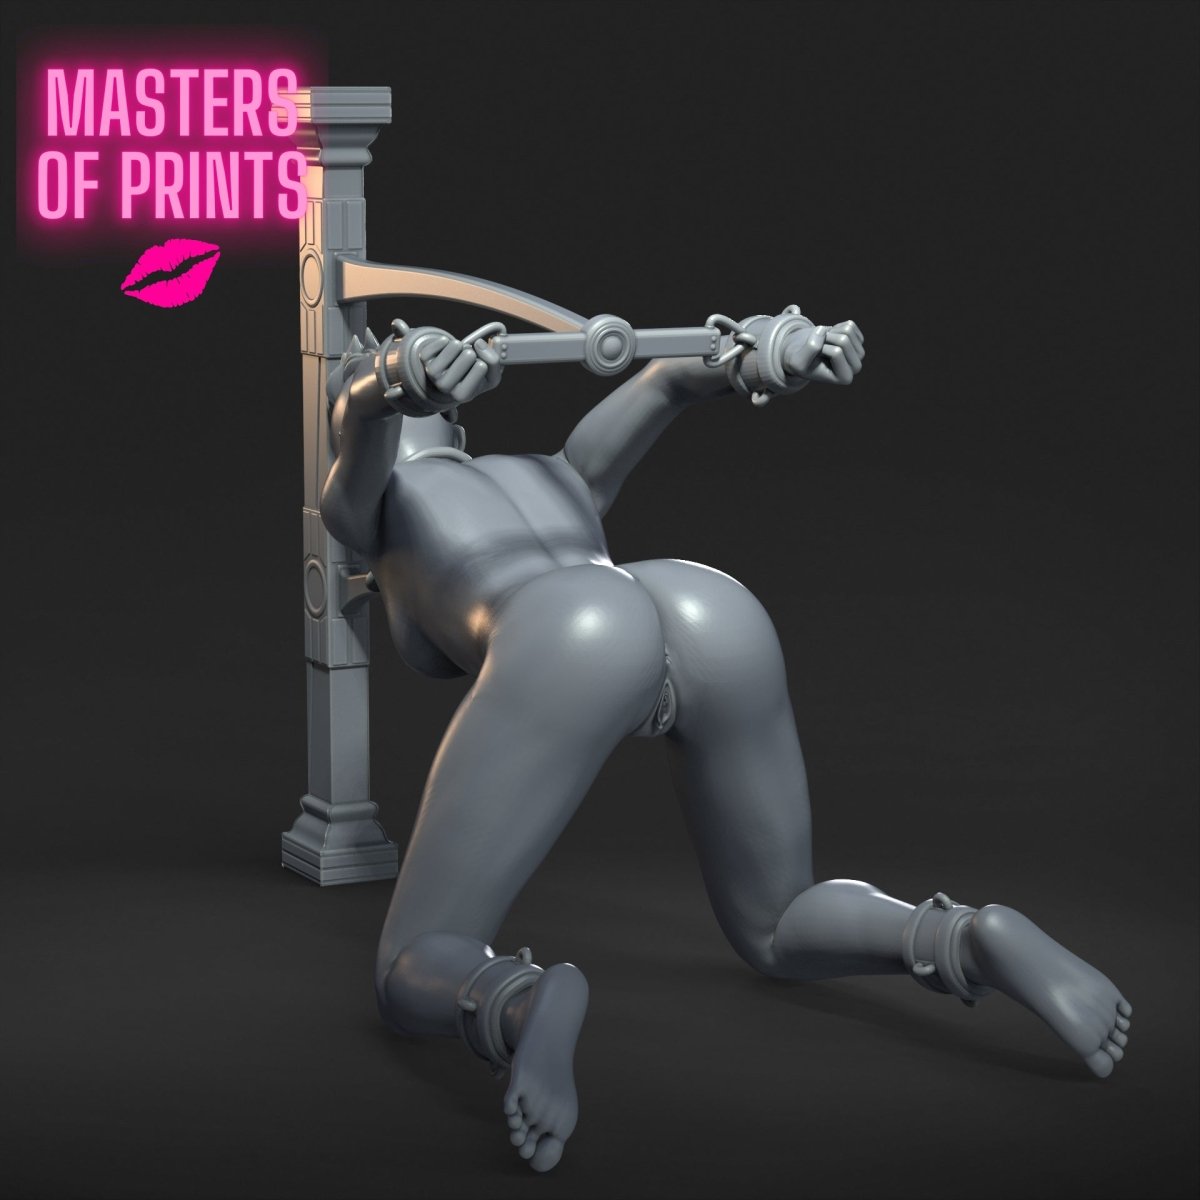 Single Restraint Post 2 Mature 3d Printed miniature FanArt by Masters Of Prints Collectables Statues & Figurines